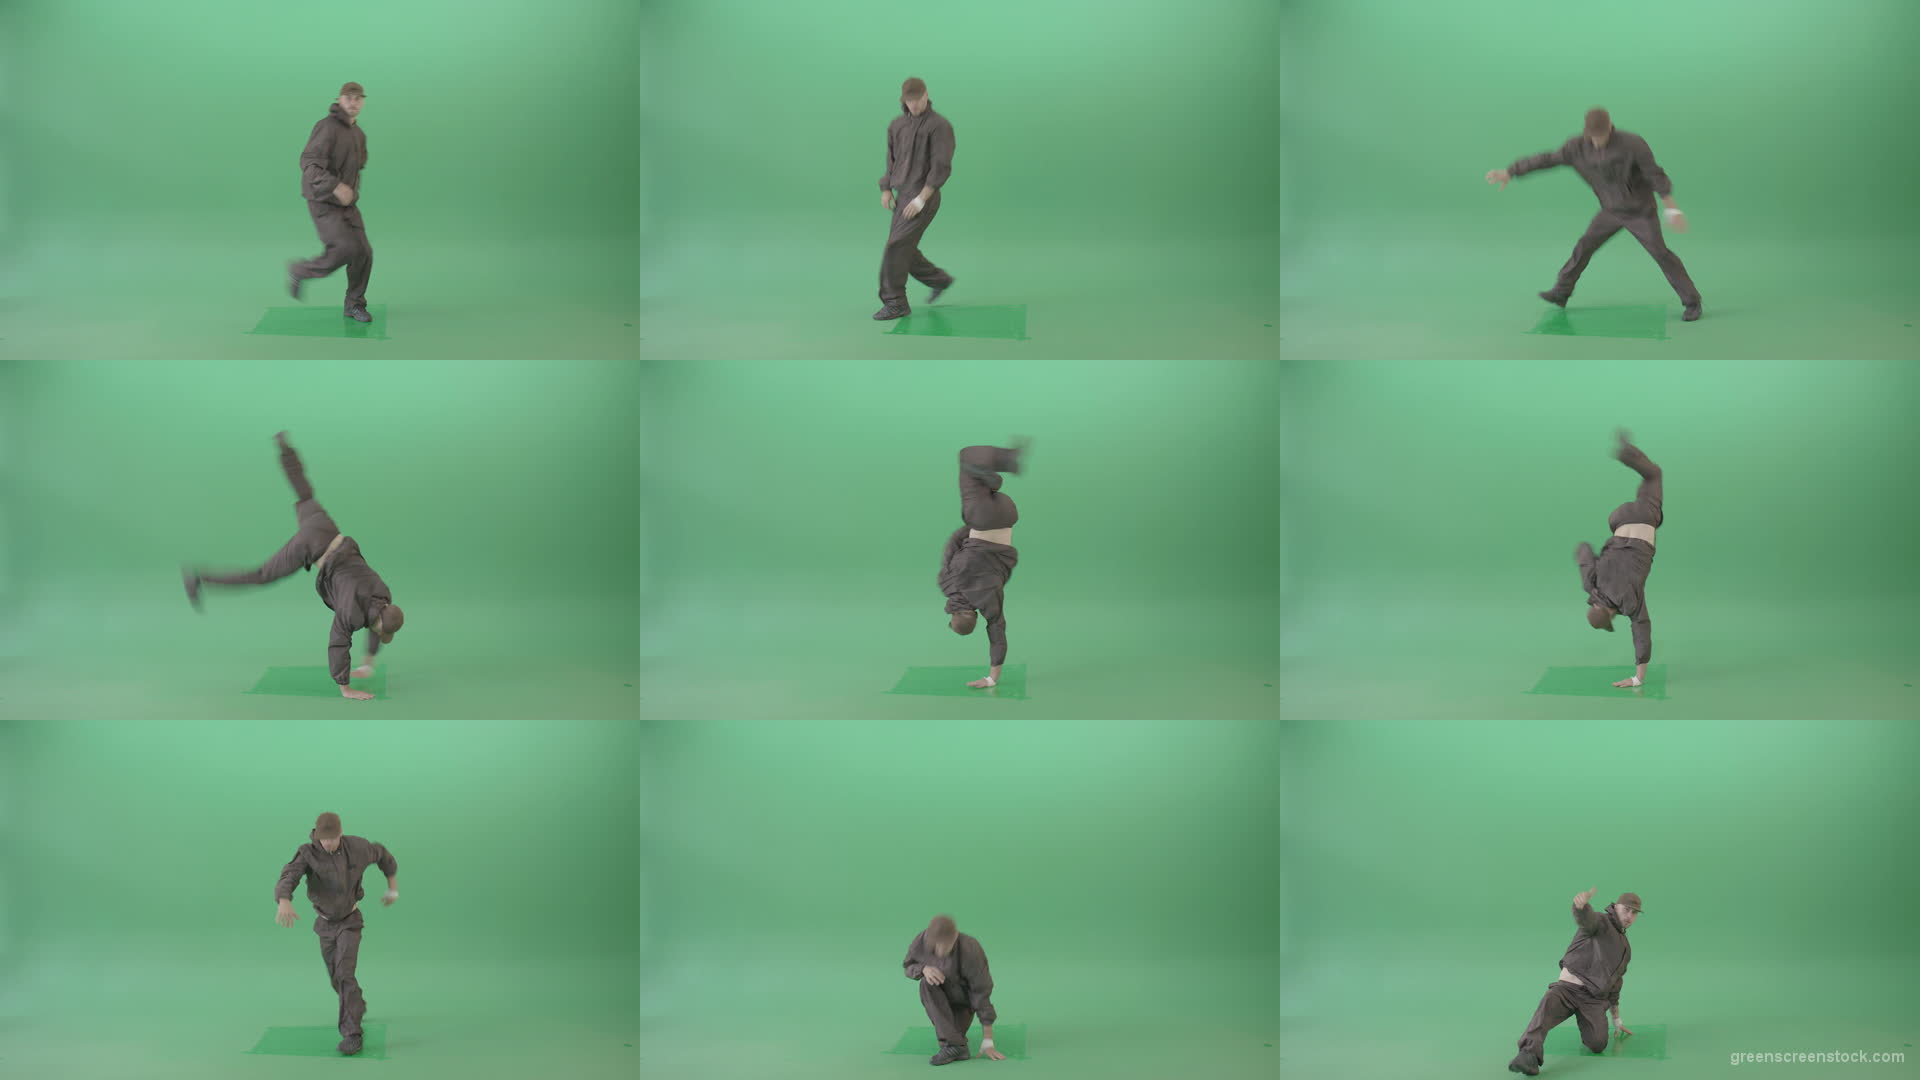 Breakadance-Man-making-dynamic-power-move-element-spinning-on-hand-over-green-screen-4K-Video-Footage-1920 Green Screen Stock